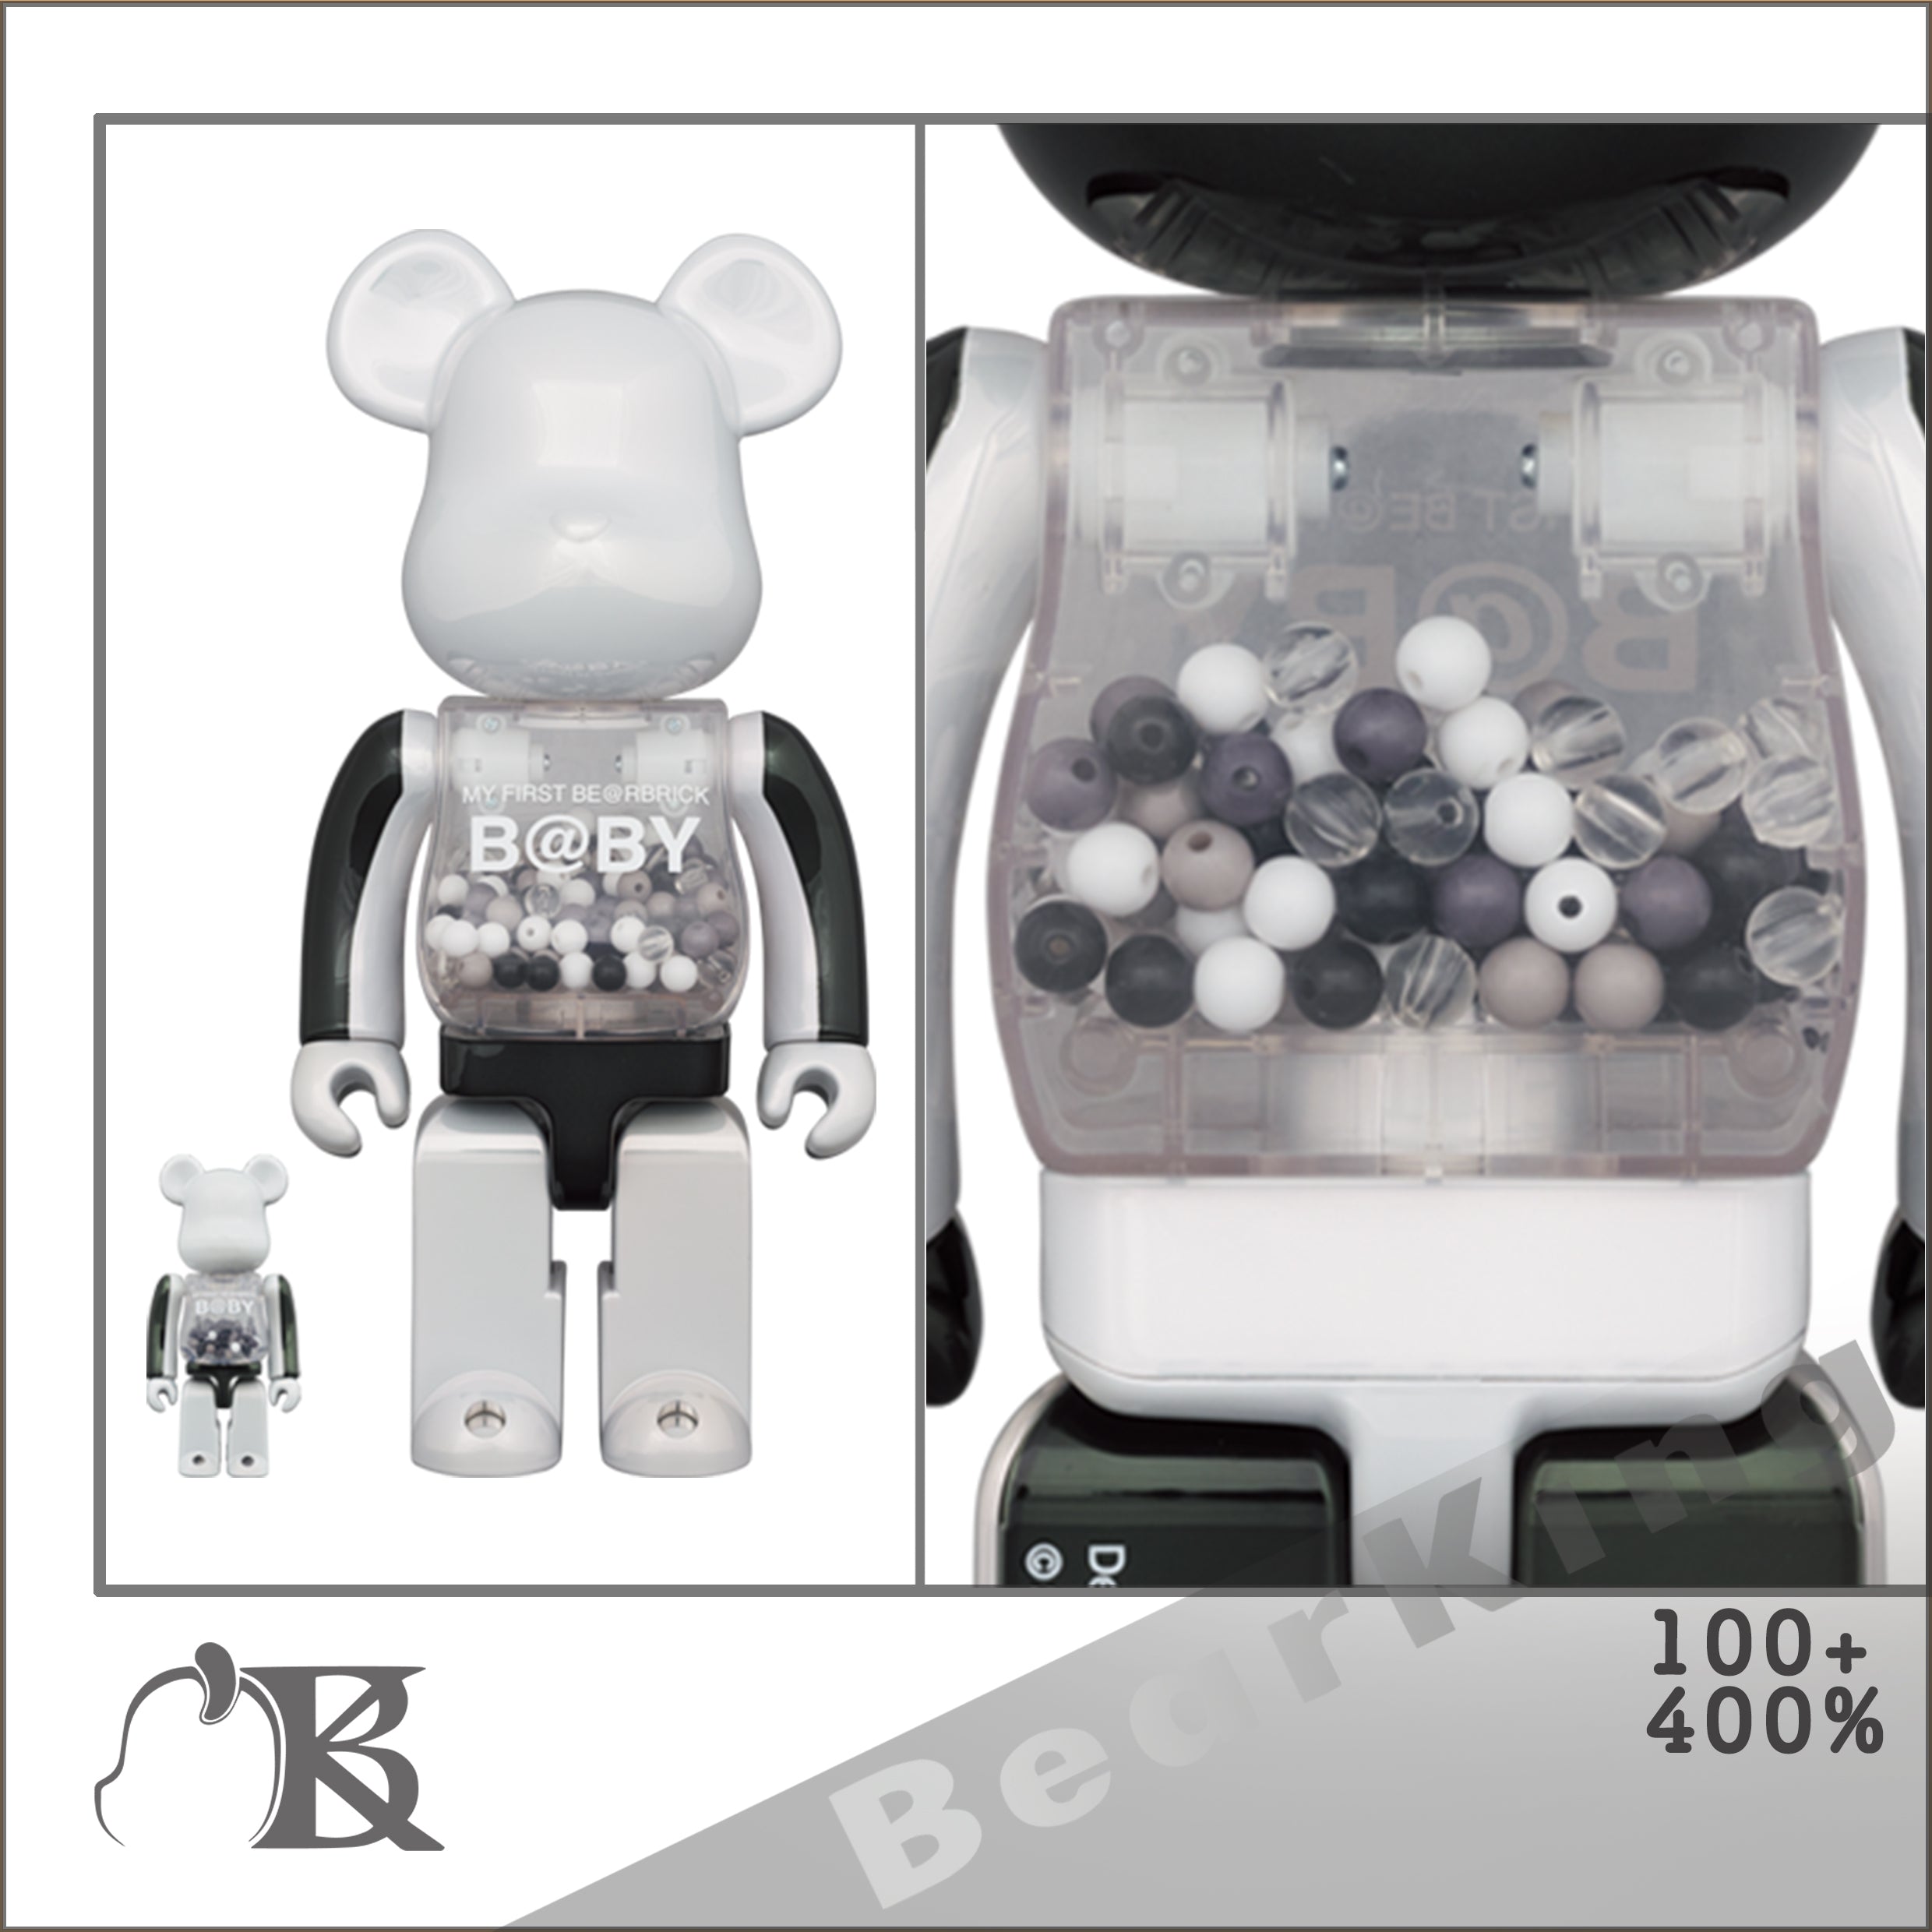 FIRST BE@RBRICK B@BY ANREALAGE100％ 400％フィギュア